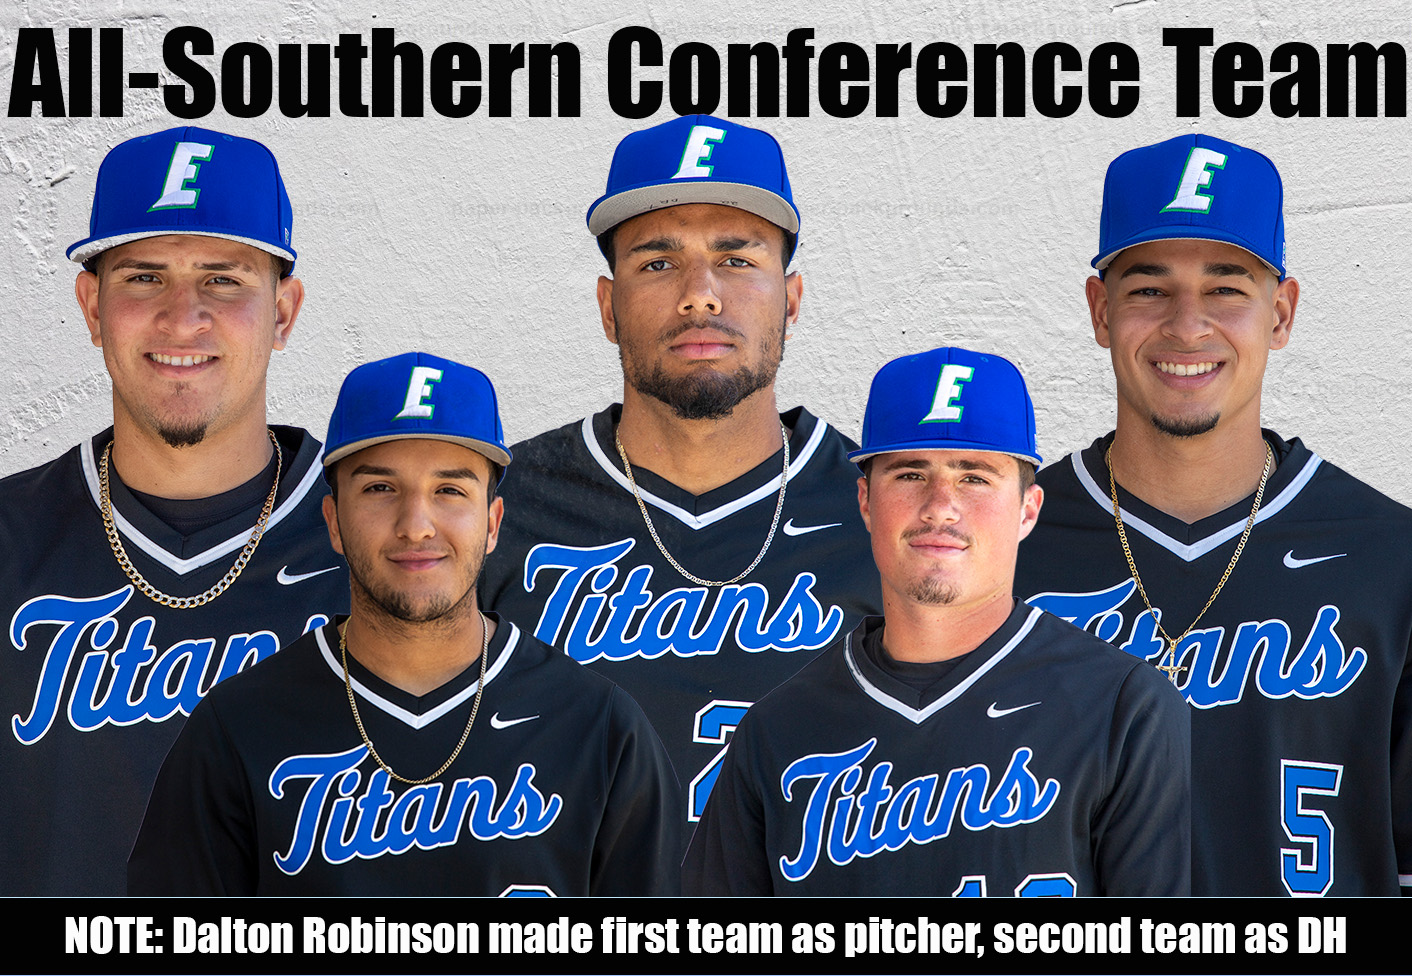 Five EFSC baseball players named to All-Southern Conference team